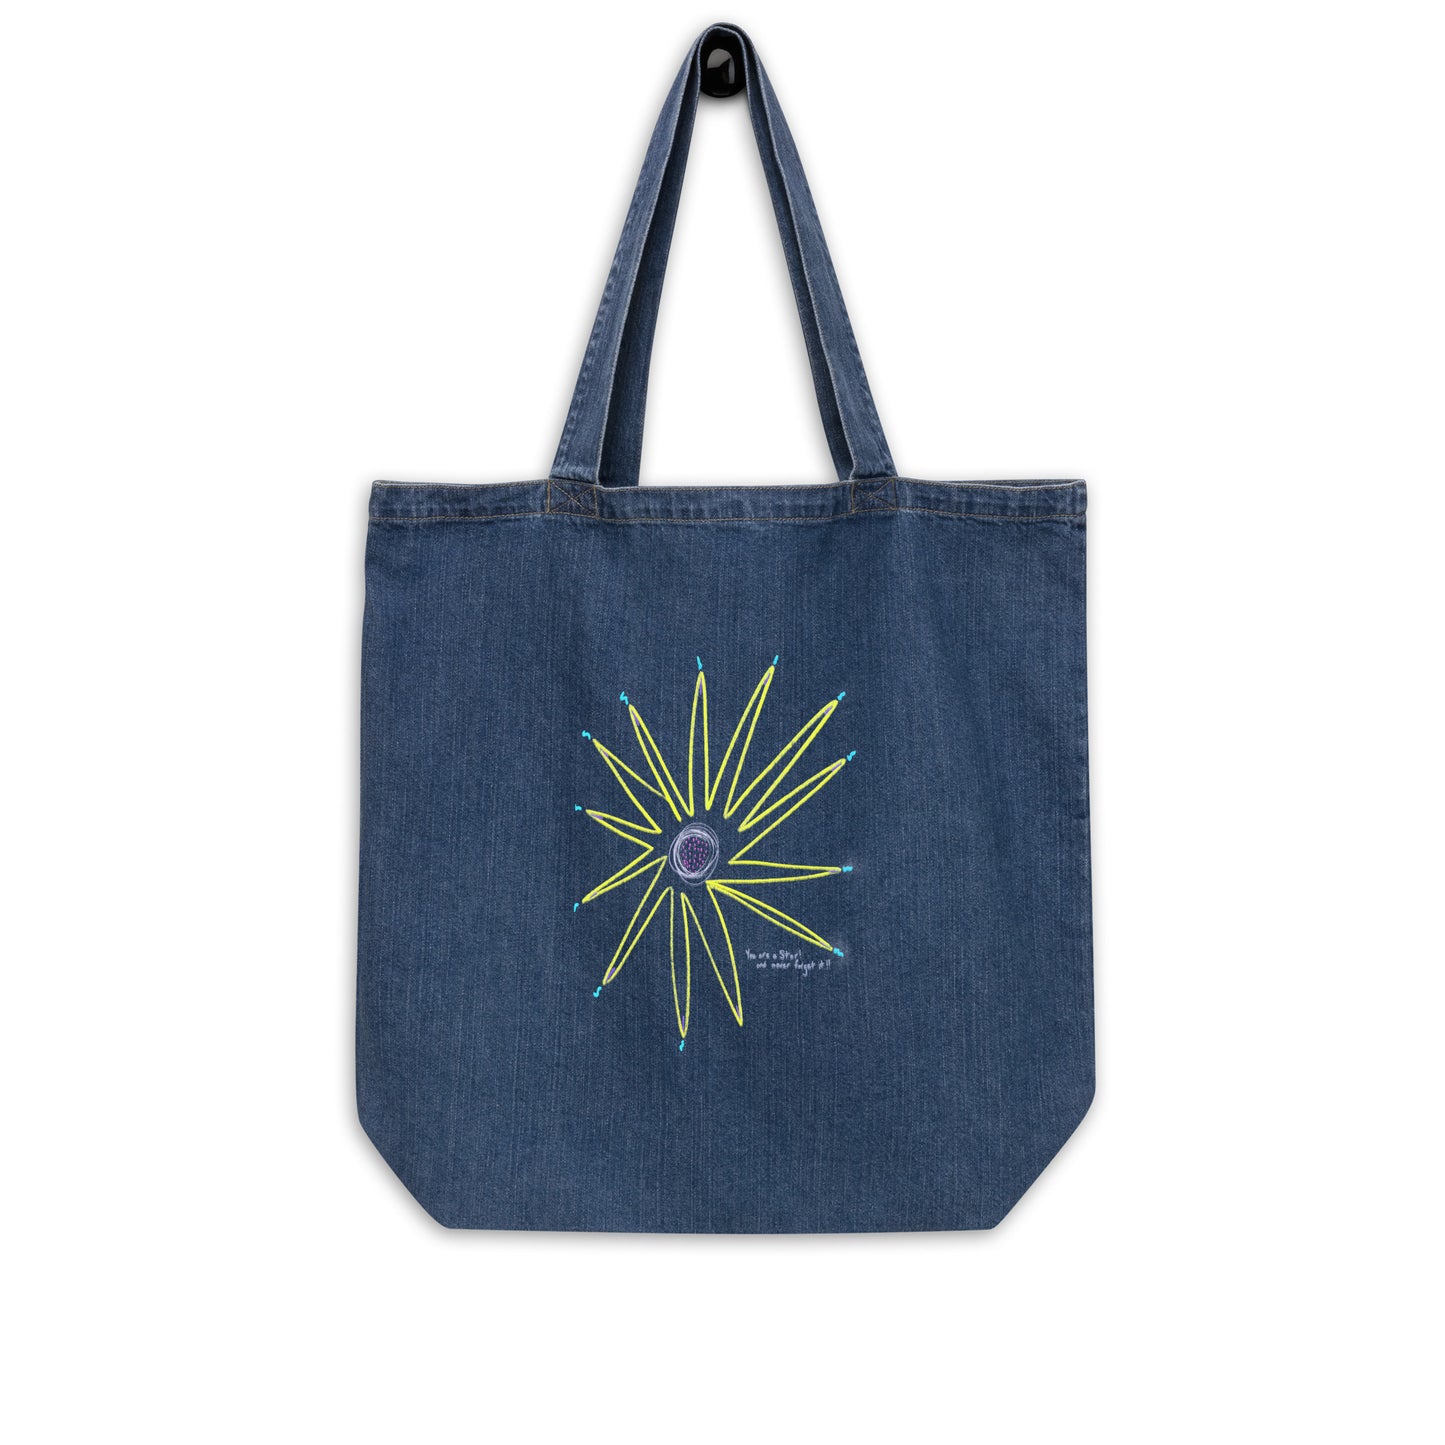 You are a star! and never forget it!! organic denim tote bag